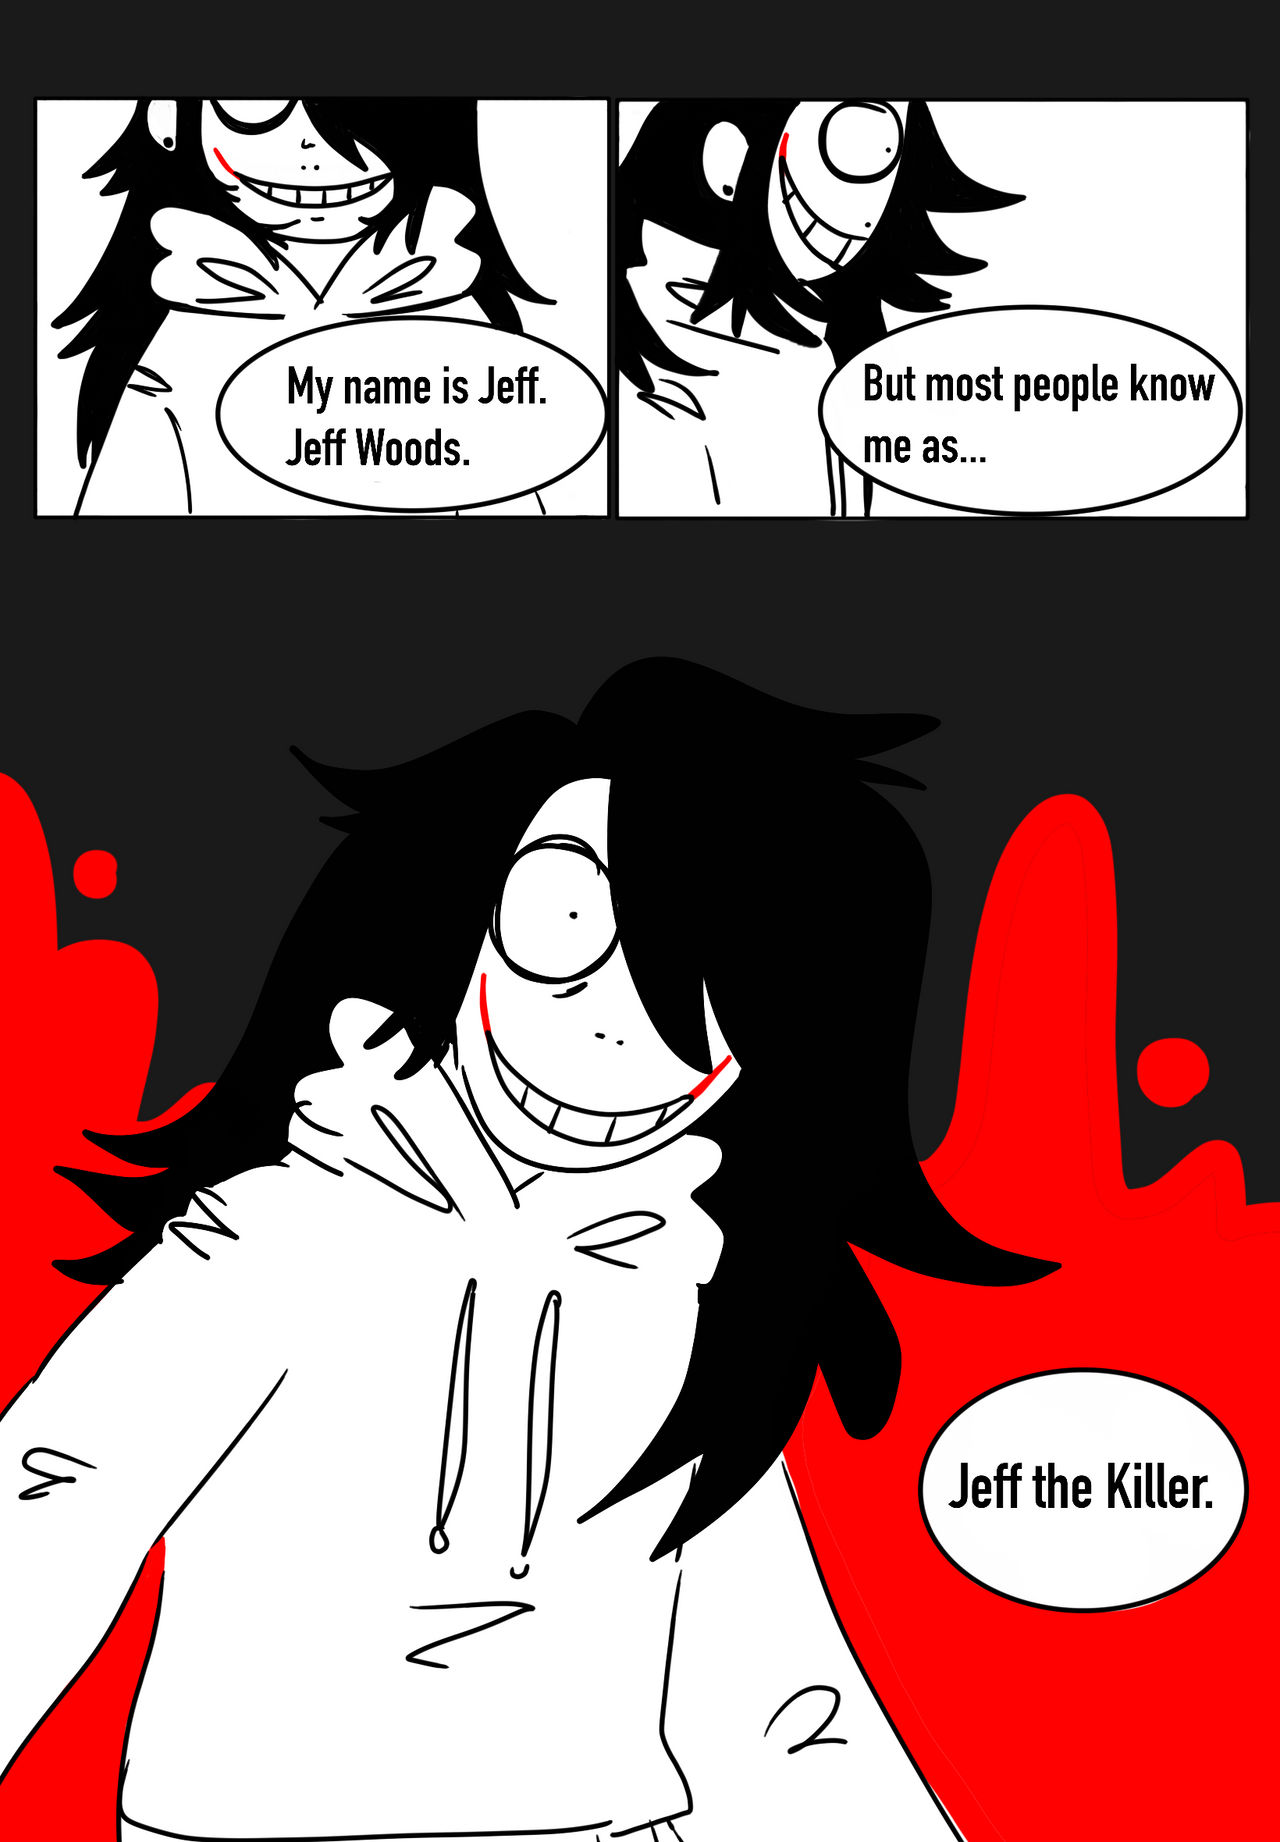 Dickitty on Instagram: Original Jeff the killer in my style